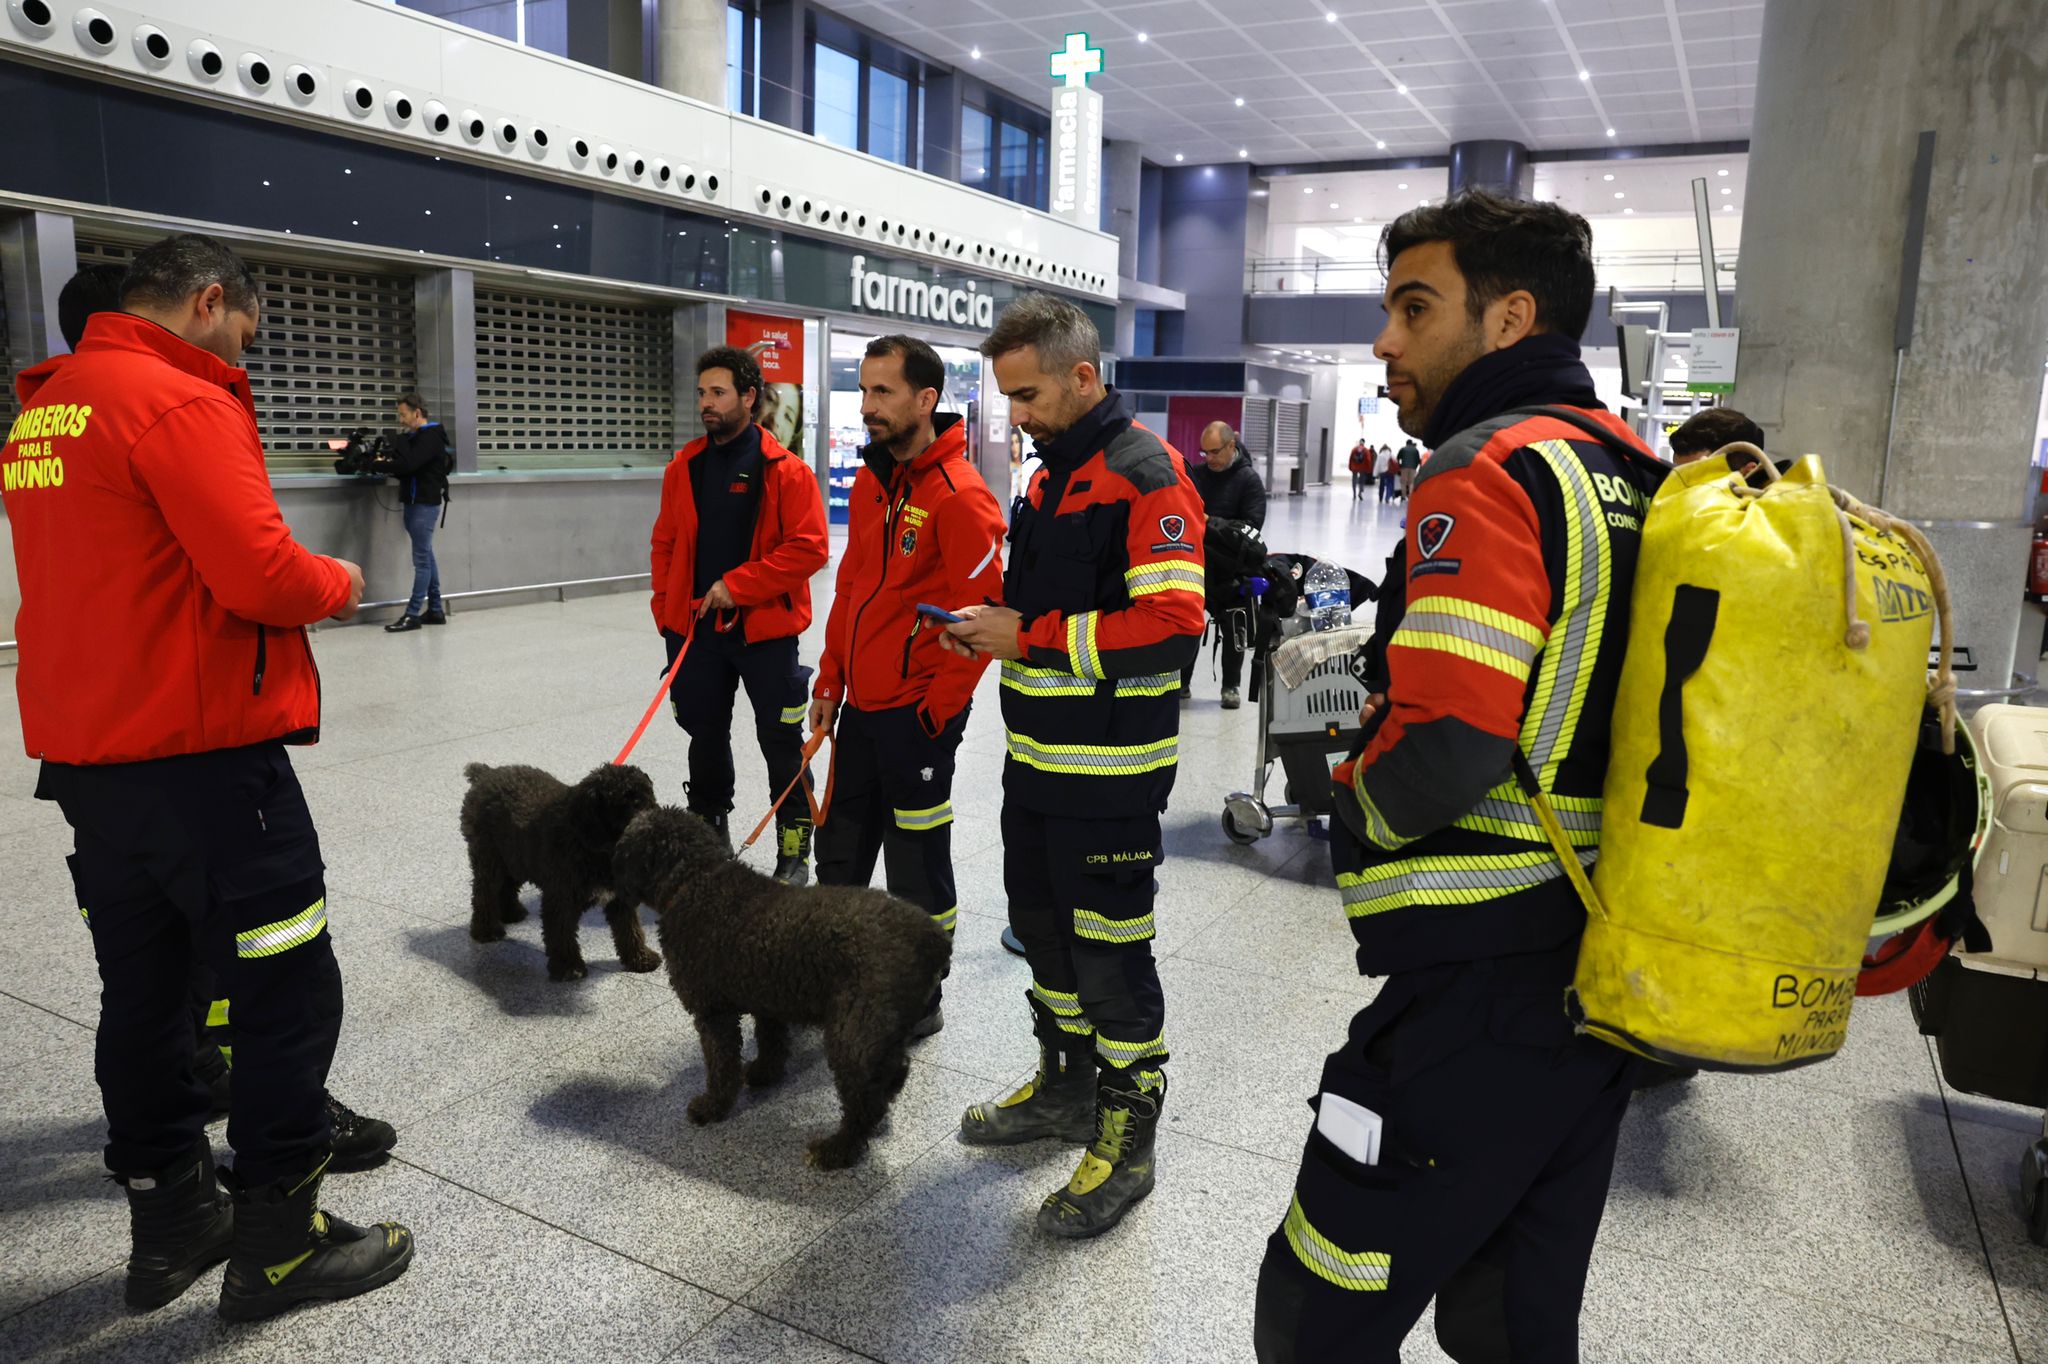 Imagen secundaria 2 - Every second counts: Malaga firefighters fly to Turkey to help in efforts to find and rescue earthquake victims